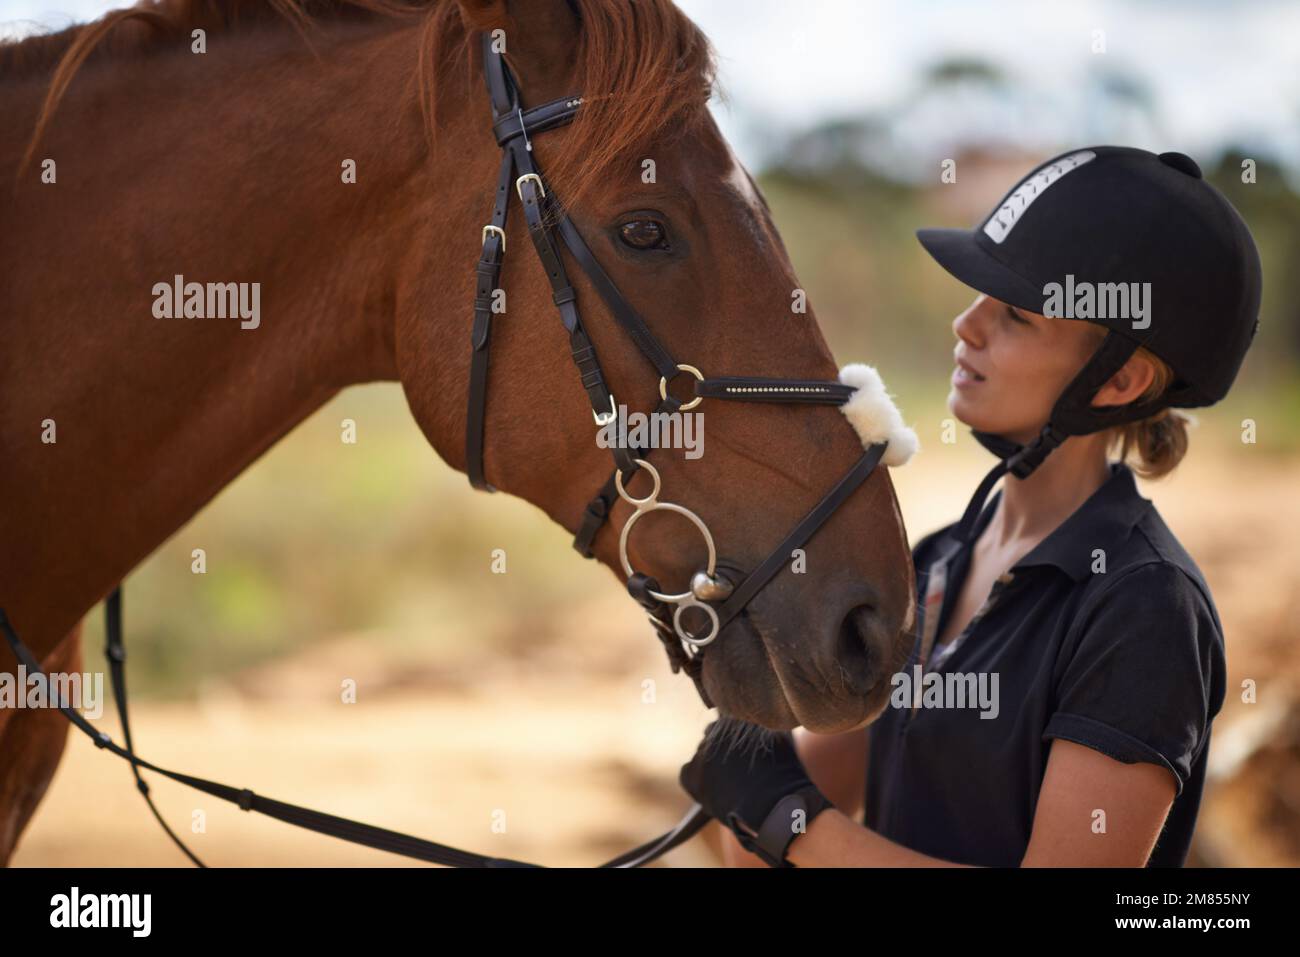 There is a bond between horse and rider. A young female rider being affectionate with her chestnut horse. Stock Photo